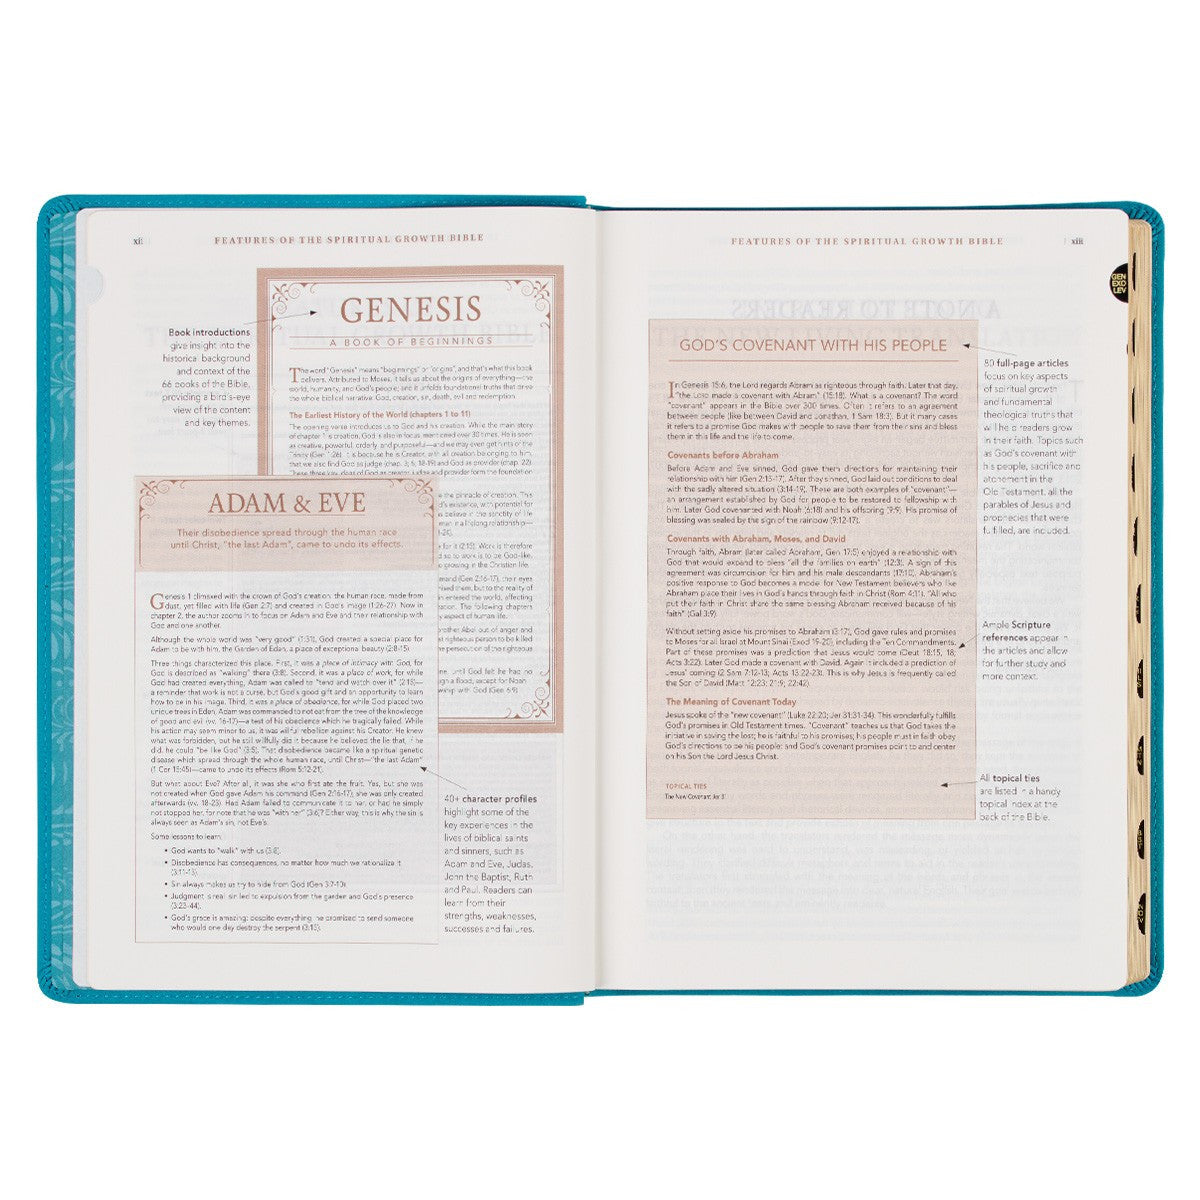 Teal Faux Leather Spiritual Growth Bible - The Christian Gift Company